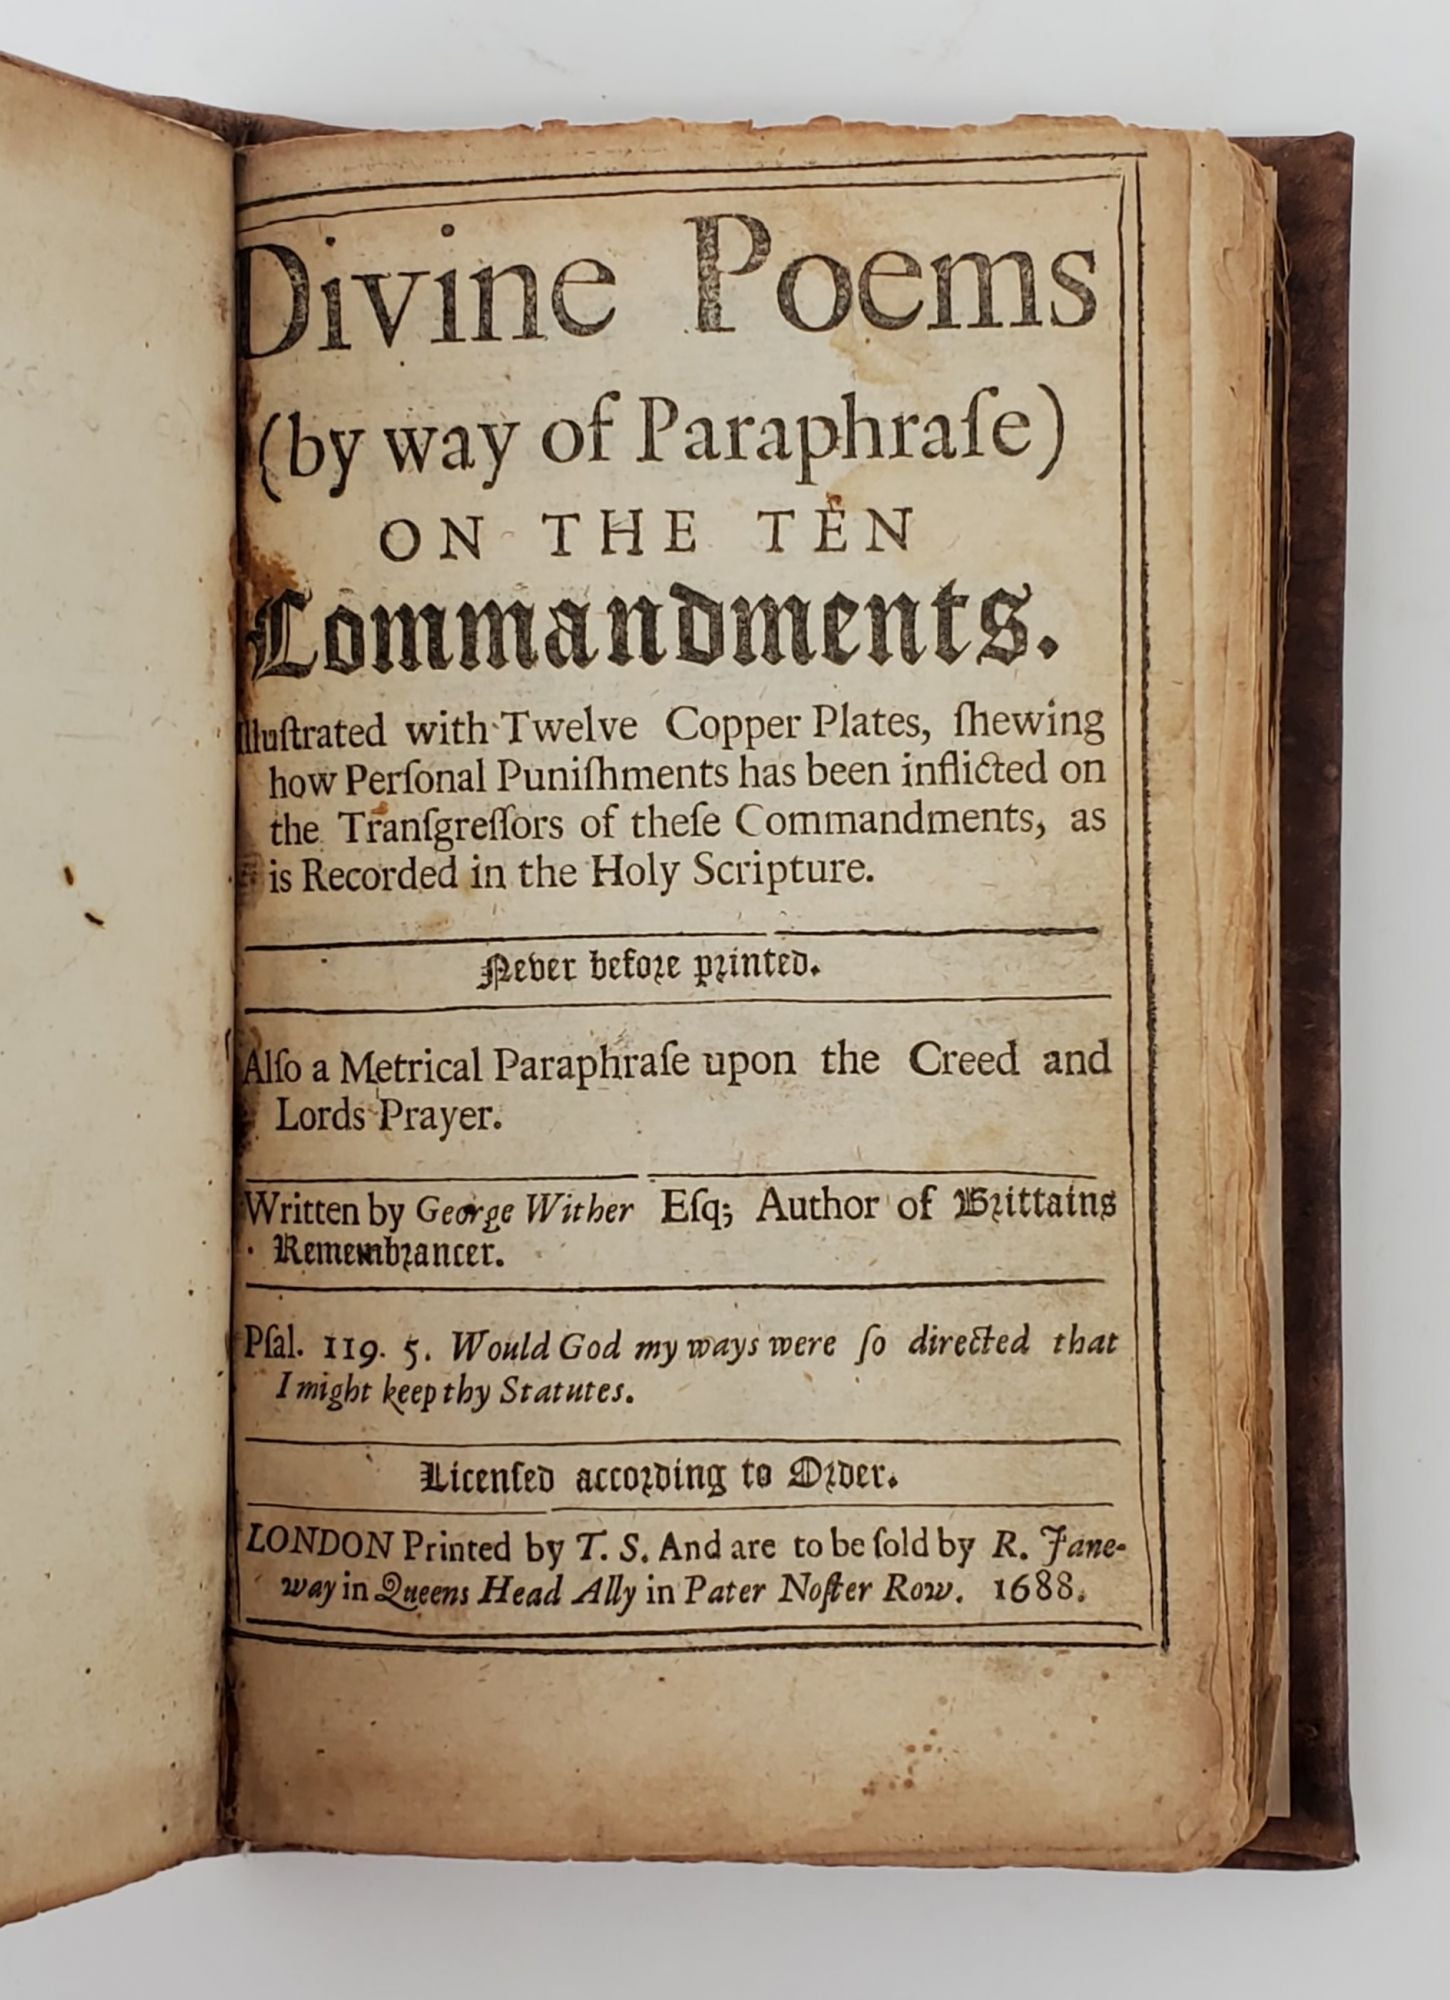 Product Image for DIVINE POEMS (BY WAY OF PARAPHRASE) ON THE TEN COMMANDMENTS